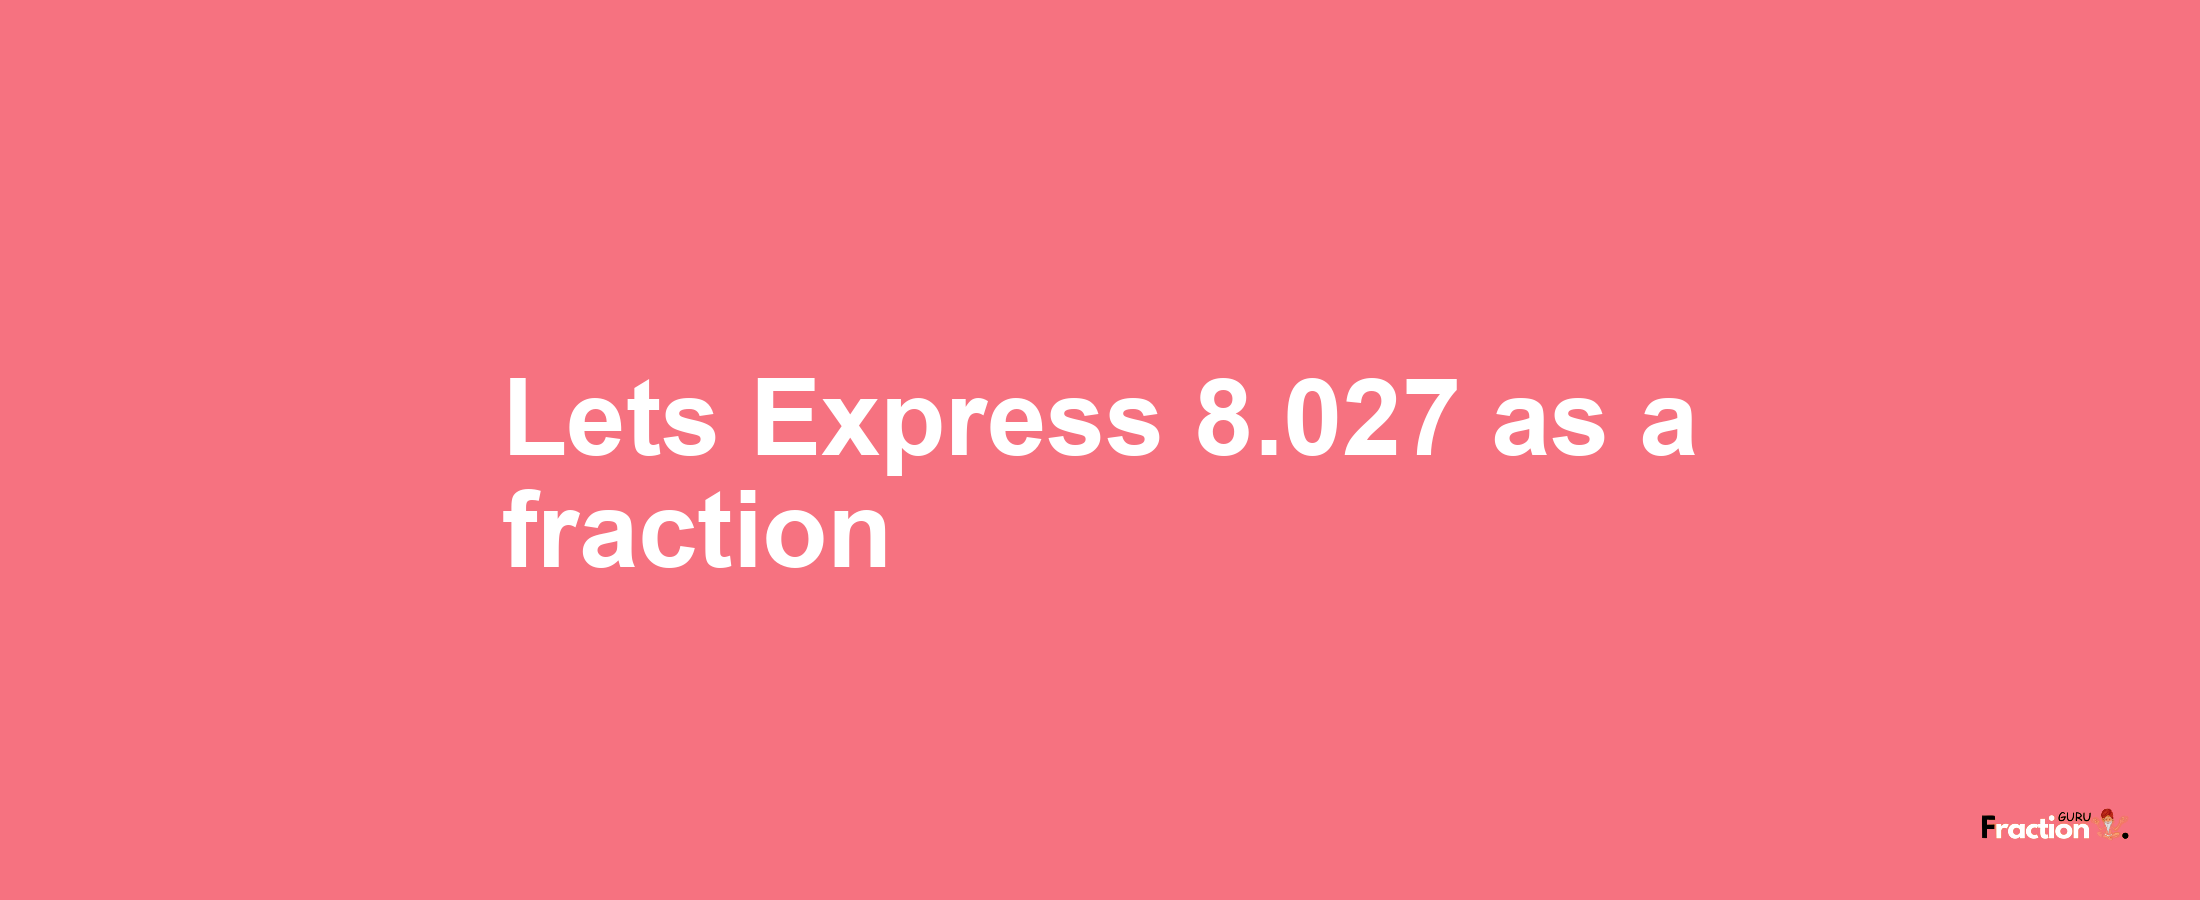 Lets Express 8.027 as afraction